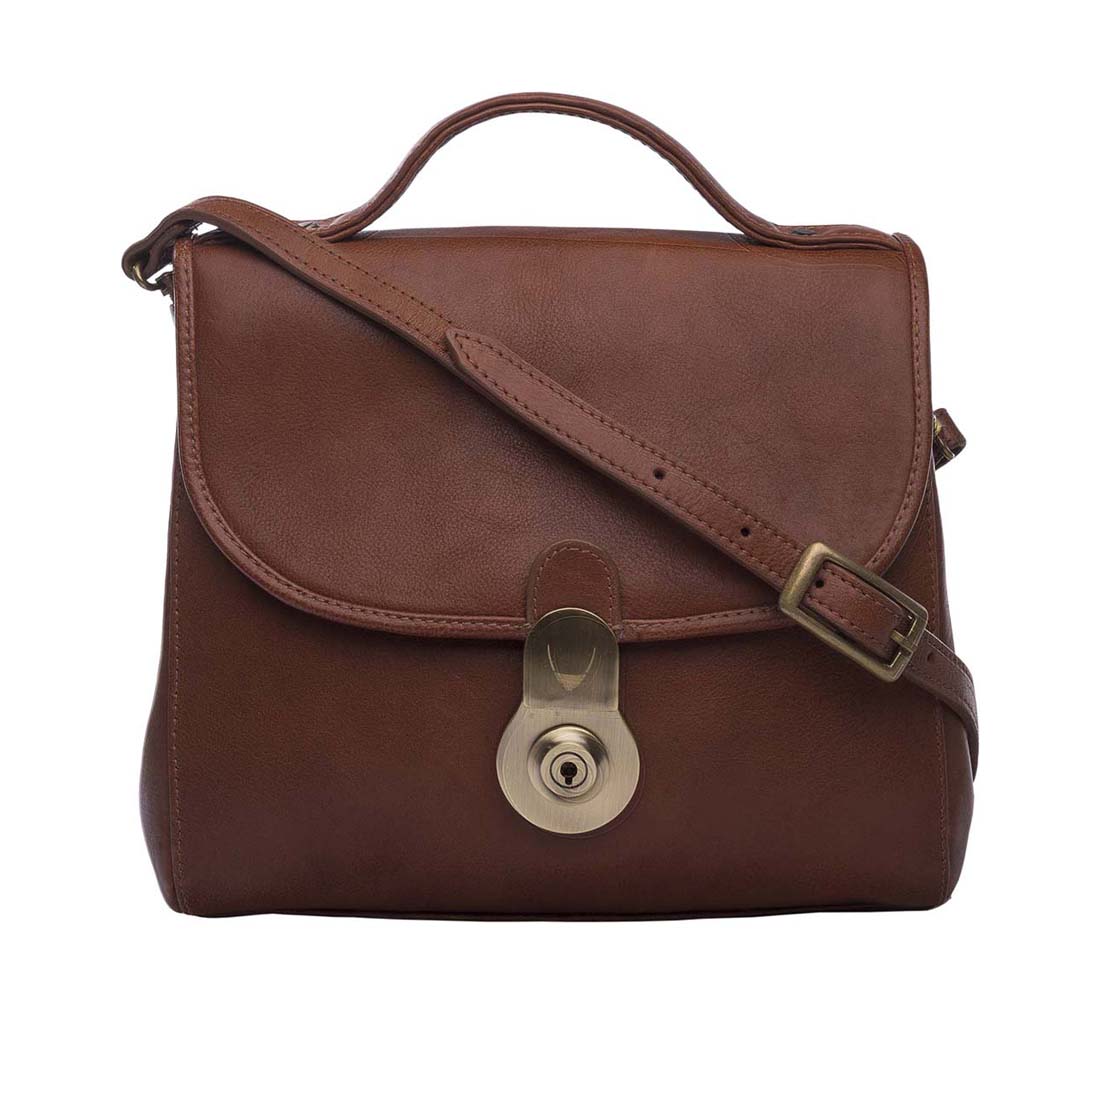 Buy Brown Small Boxy Sling Bag Online - Hidesign